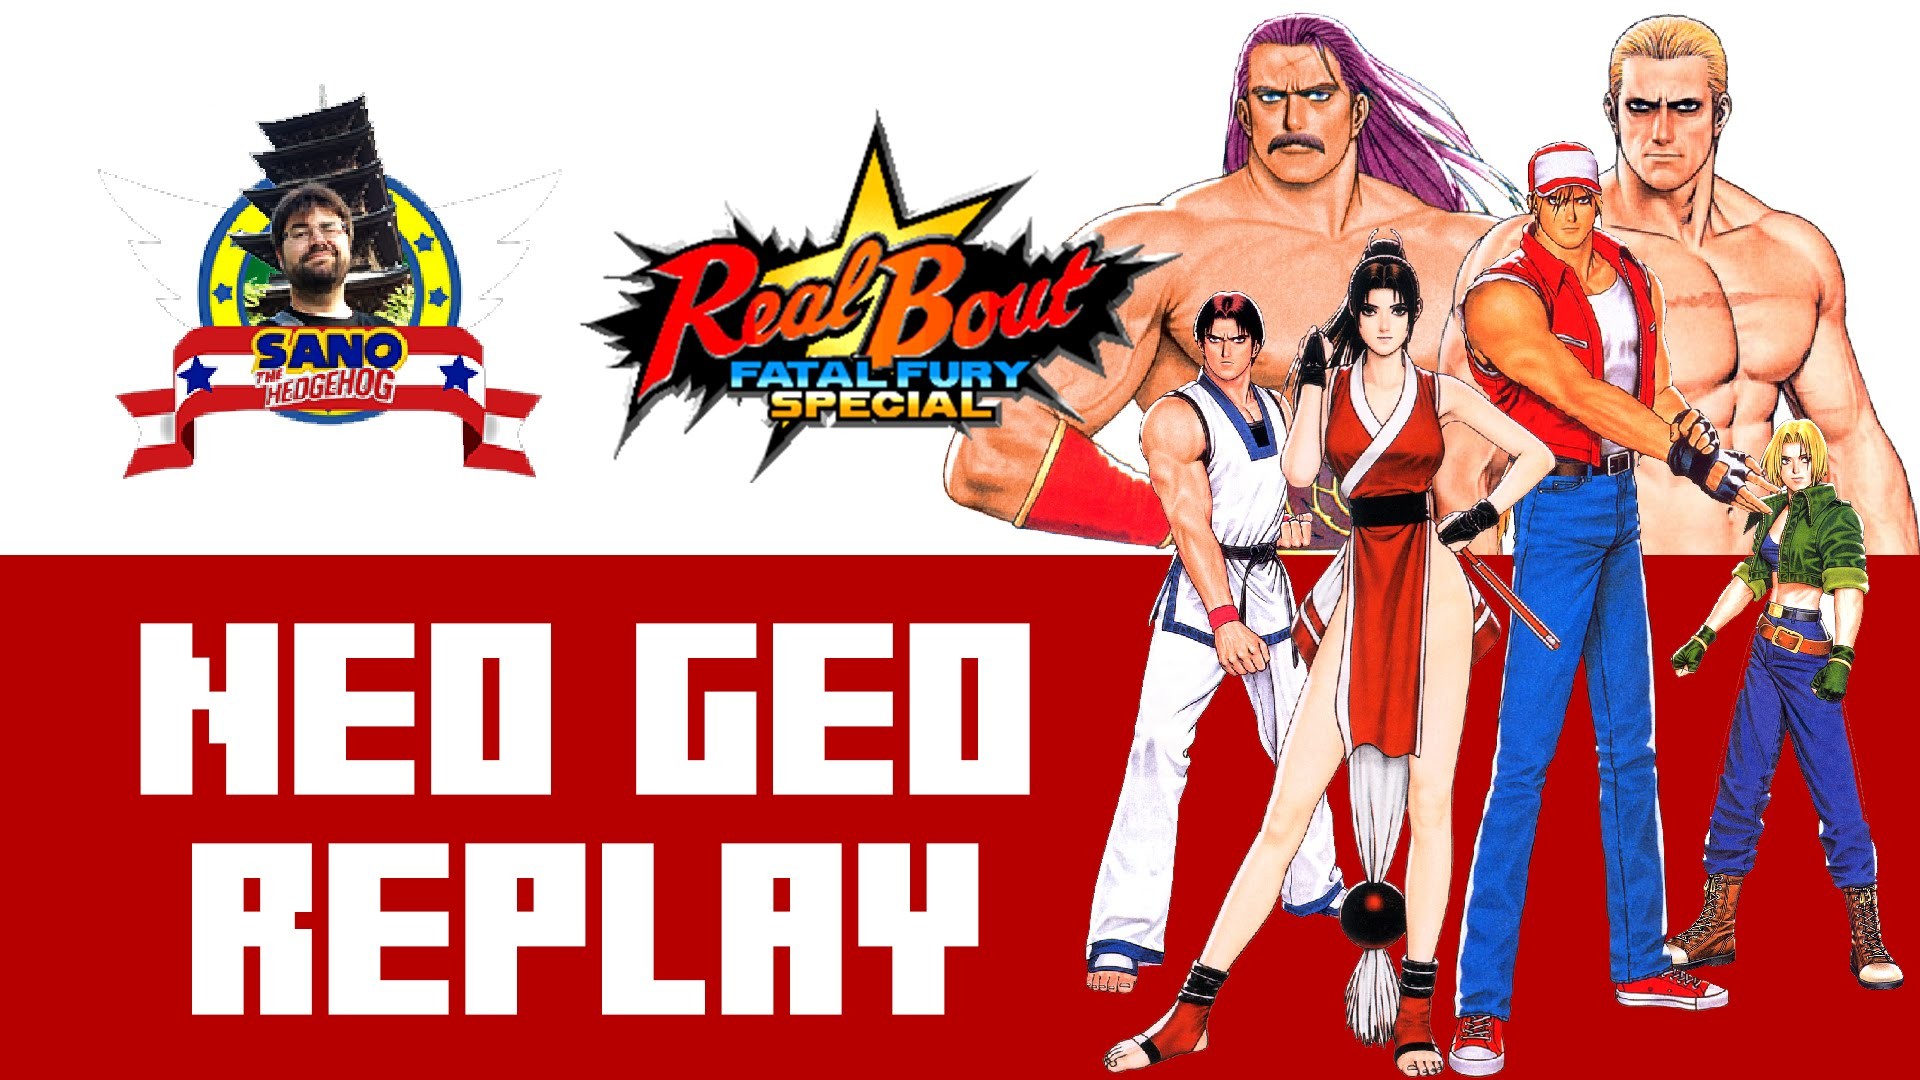 1920x1080 Real Bout Fatal Fury Special - NEO GEO - SNK - Bitzemaul retro